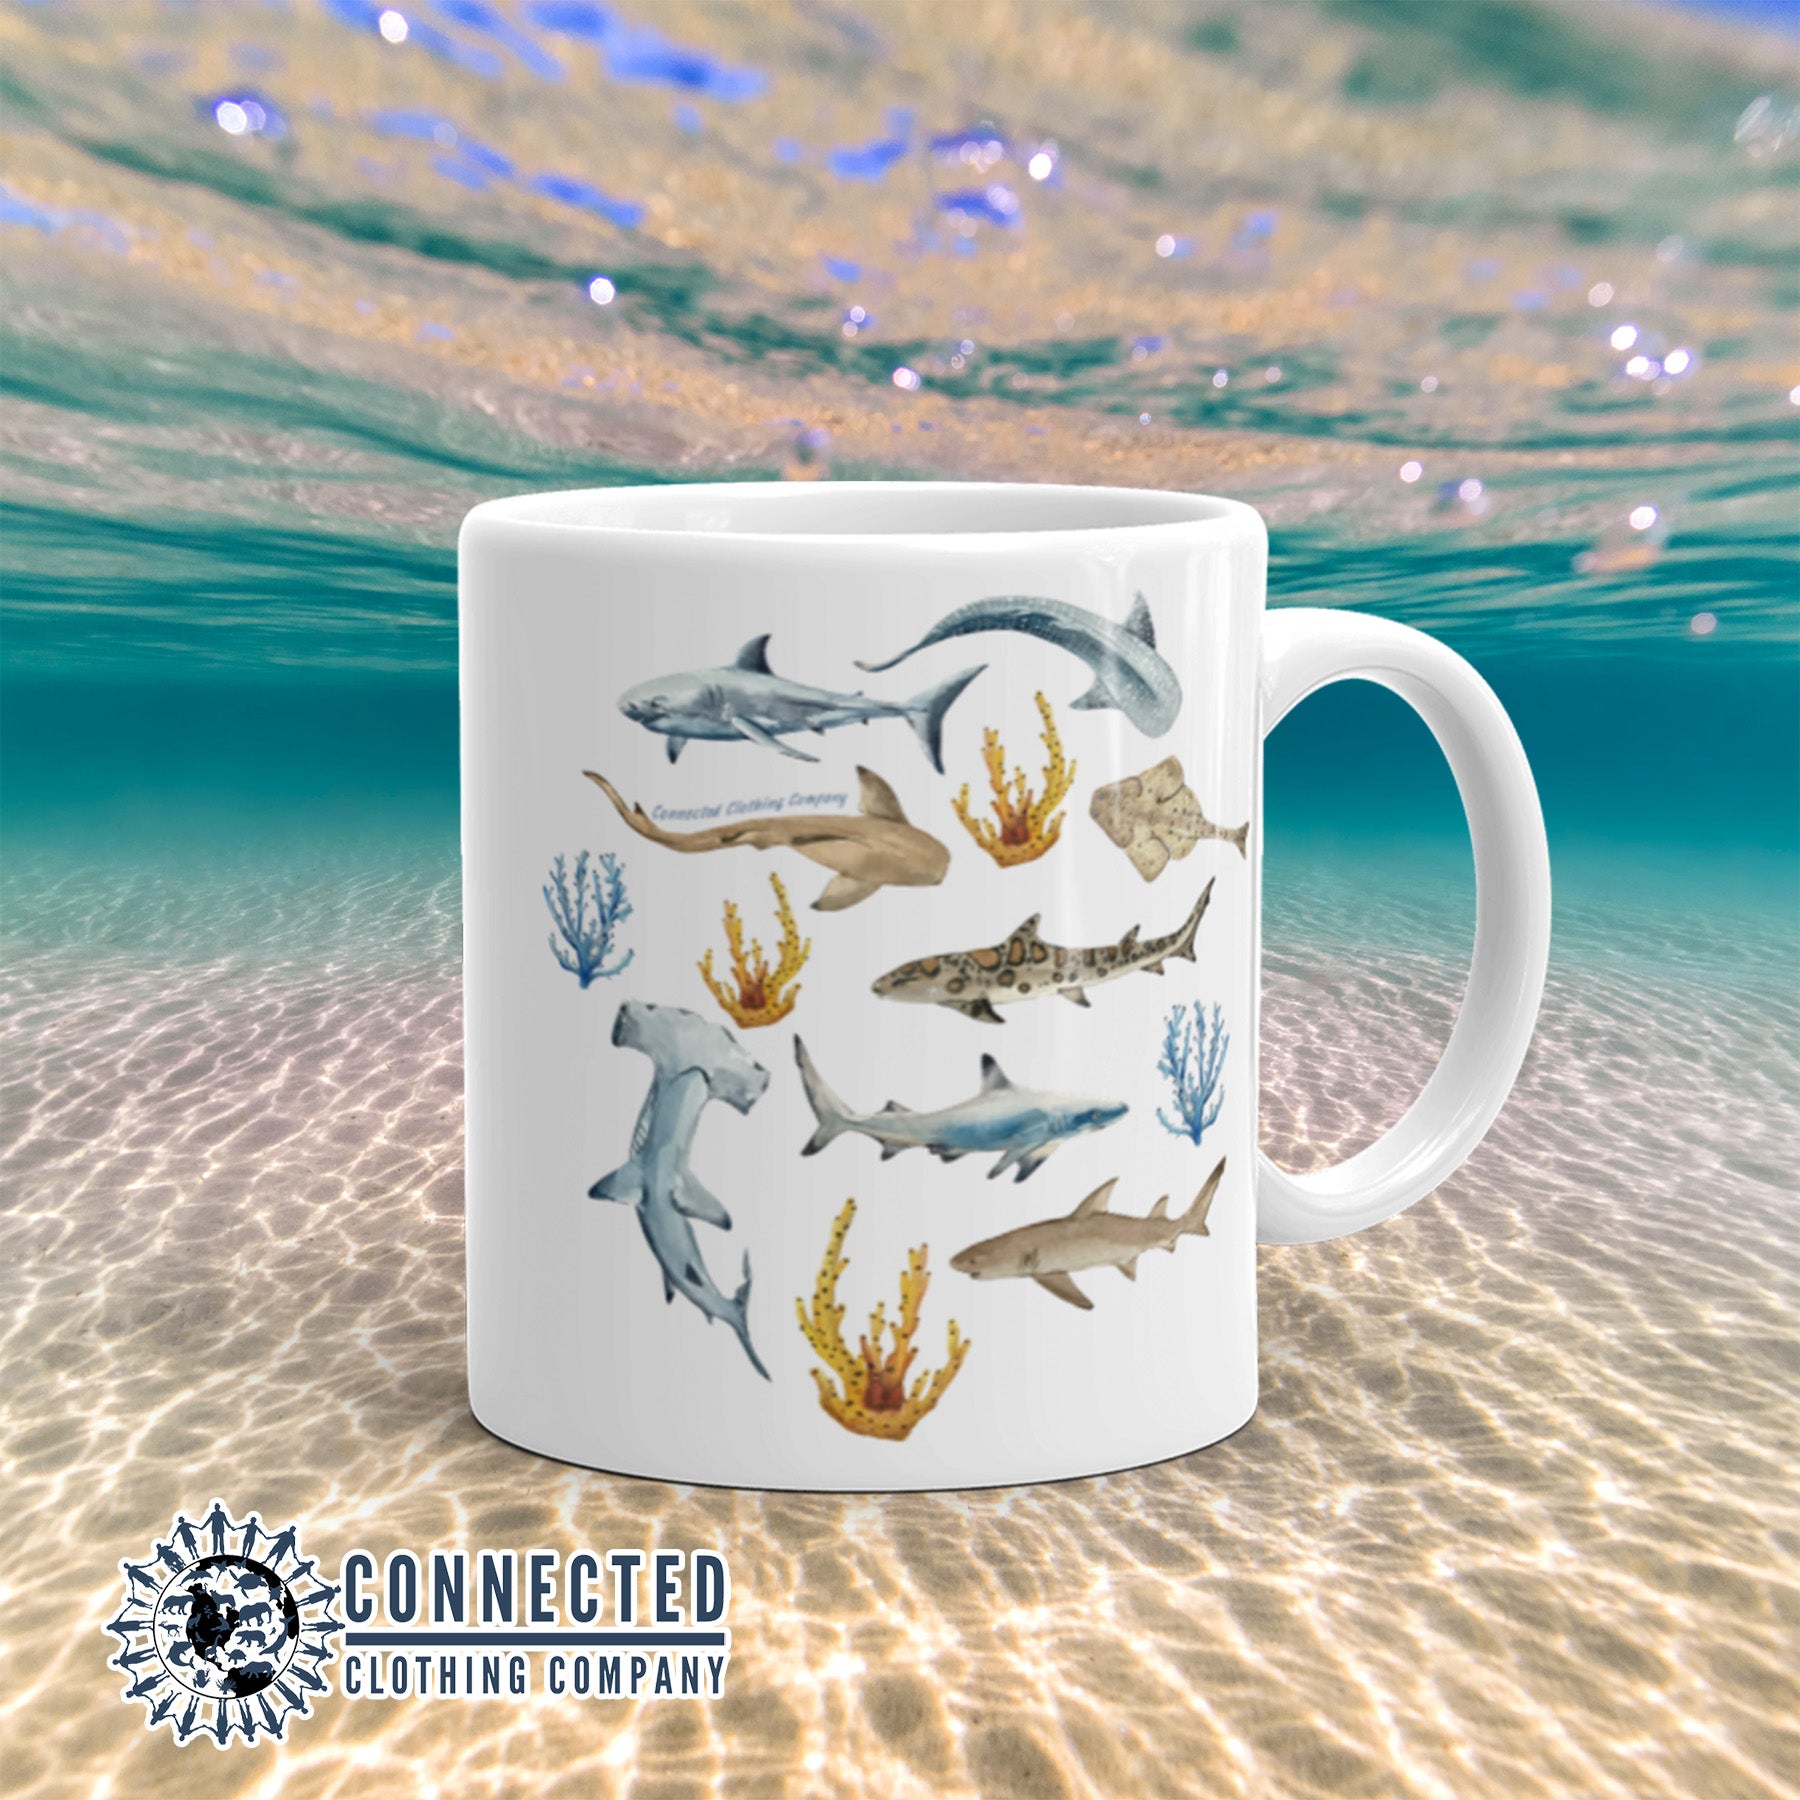 Right side of White Shark Ocean Watercolor Classic Mug - Connected Clothing Company - Ethically and Sustainably Made - 10% of profits donated to shark conservation and ocean conservation